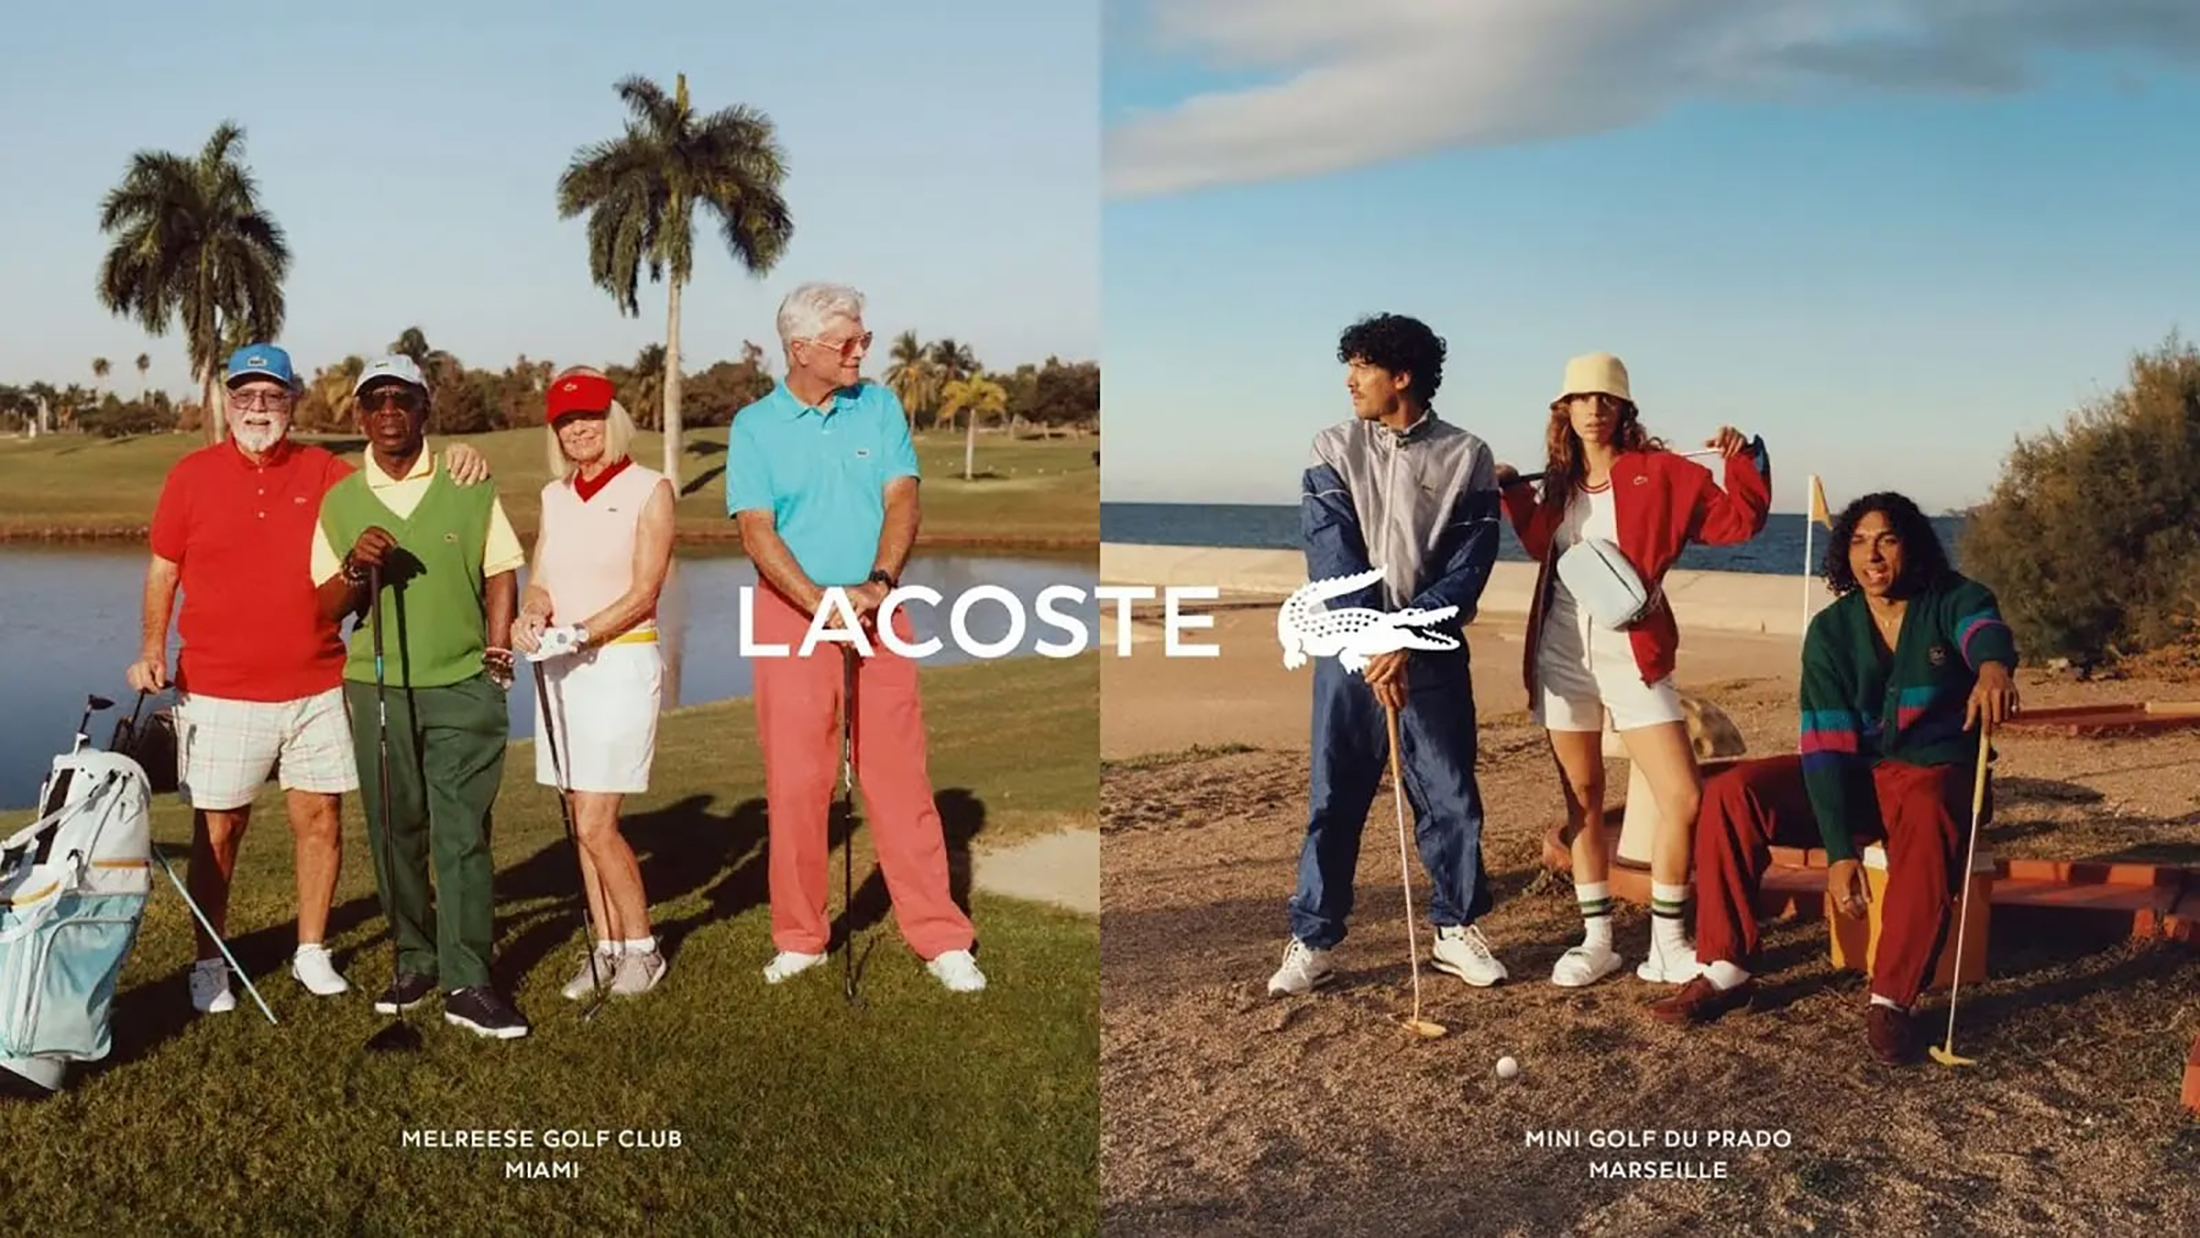 Lacoste x Netflix Spring 2023 Ad Campaign Review